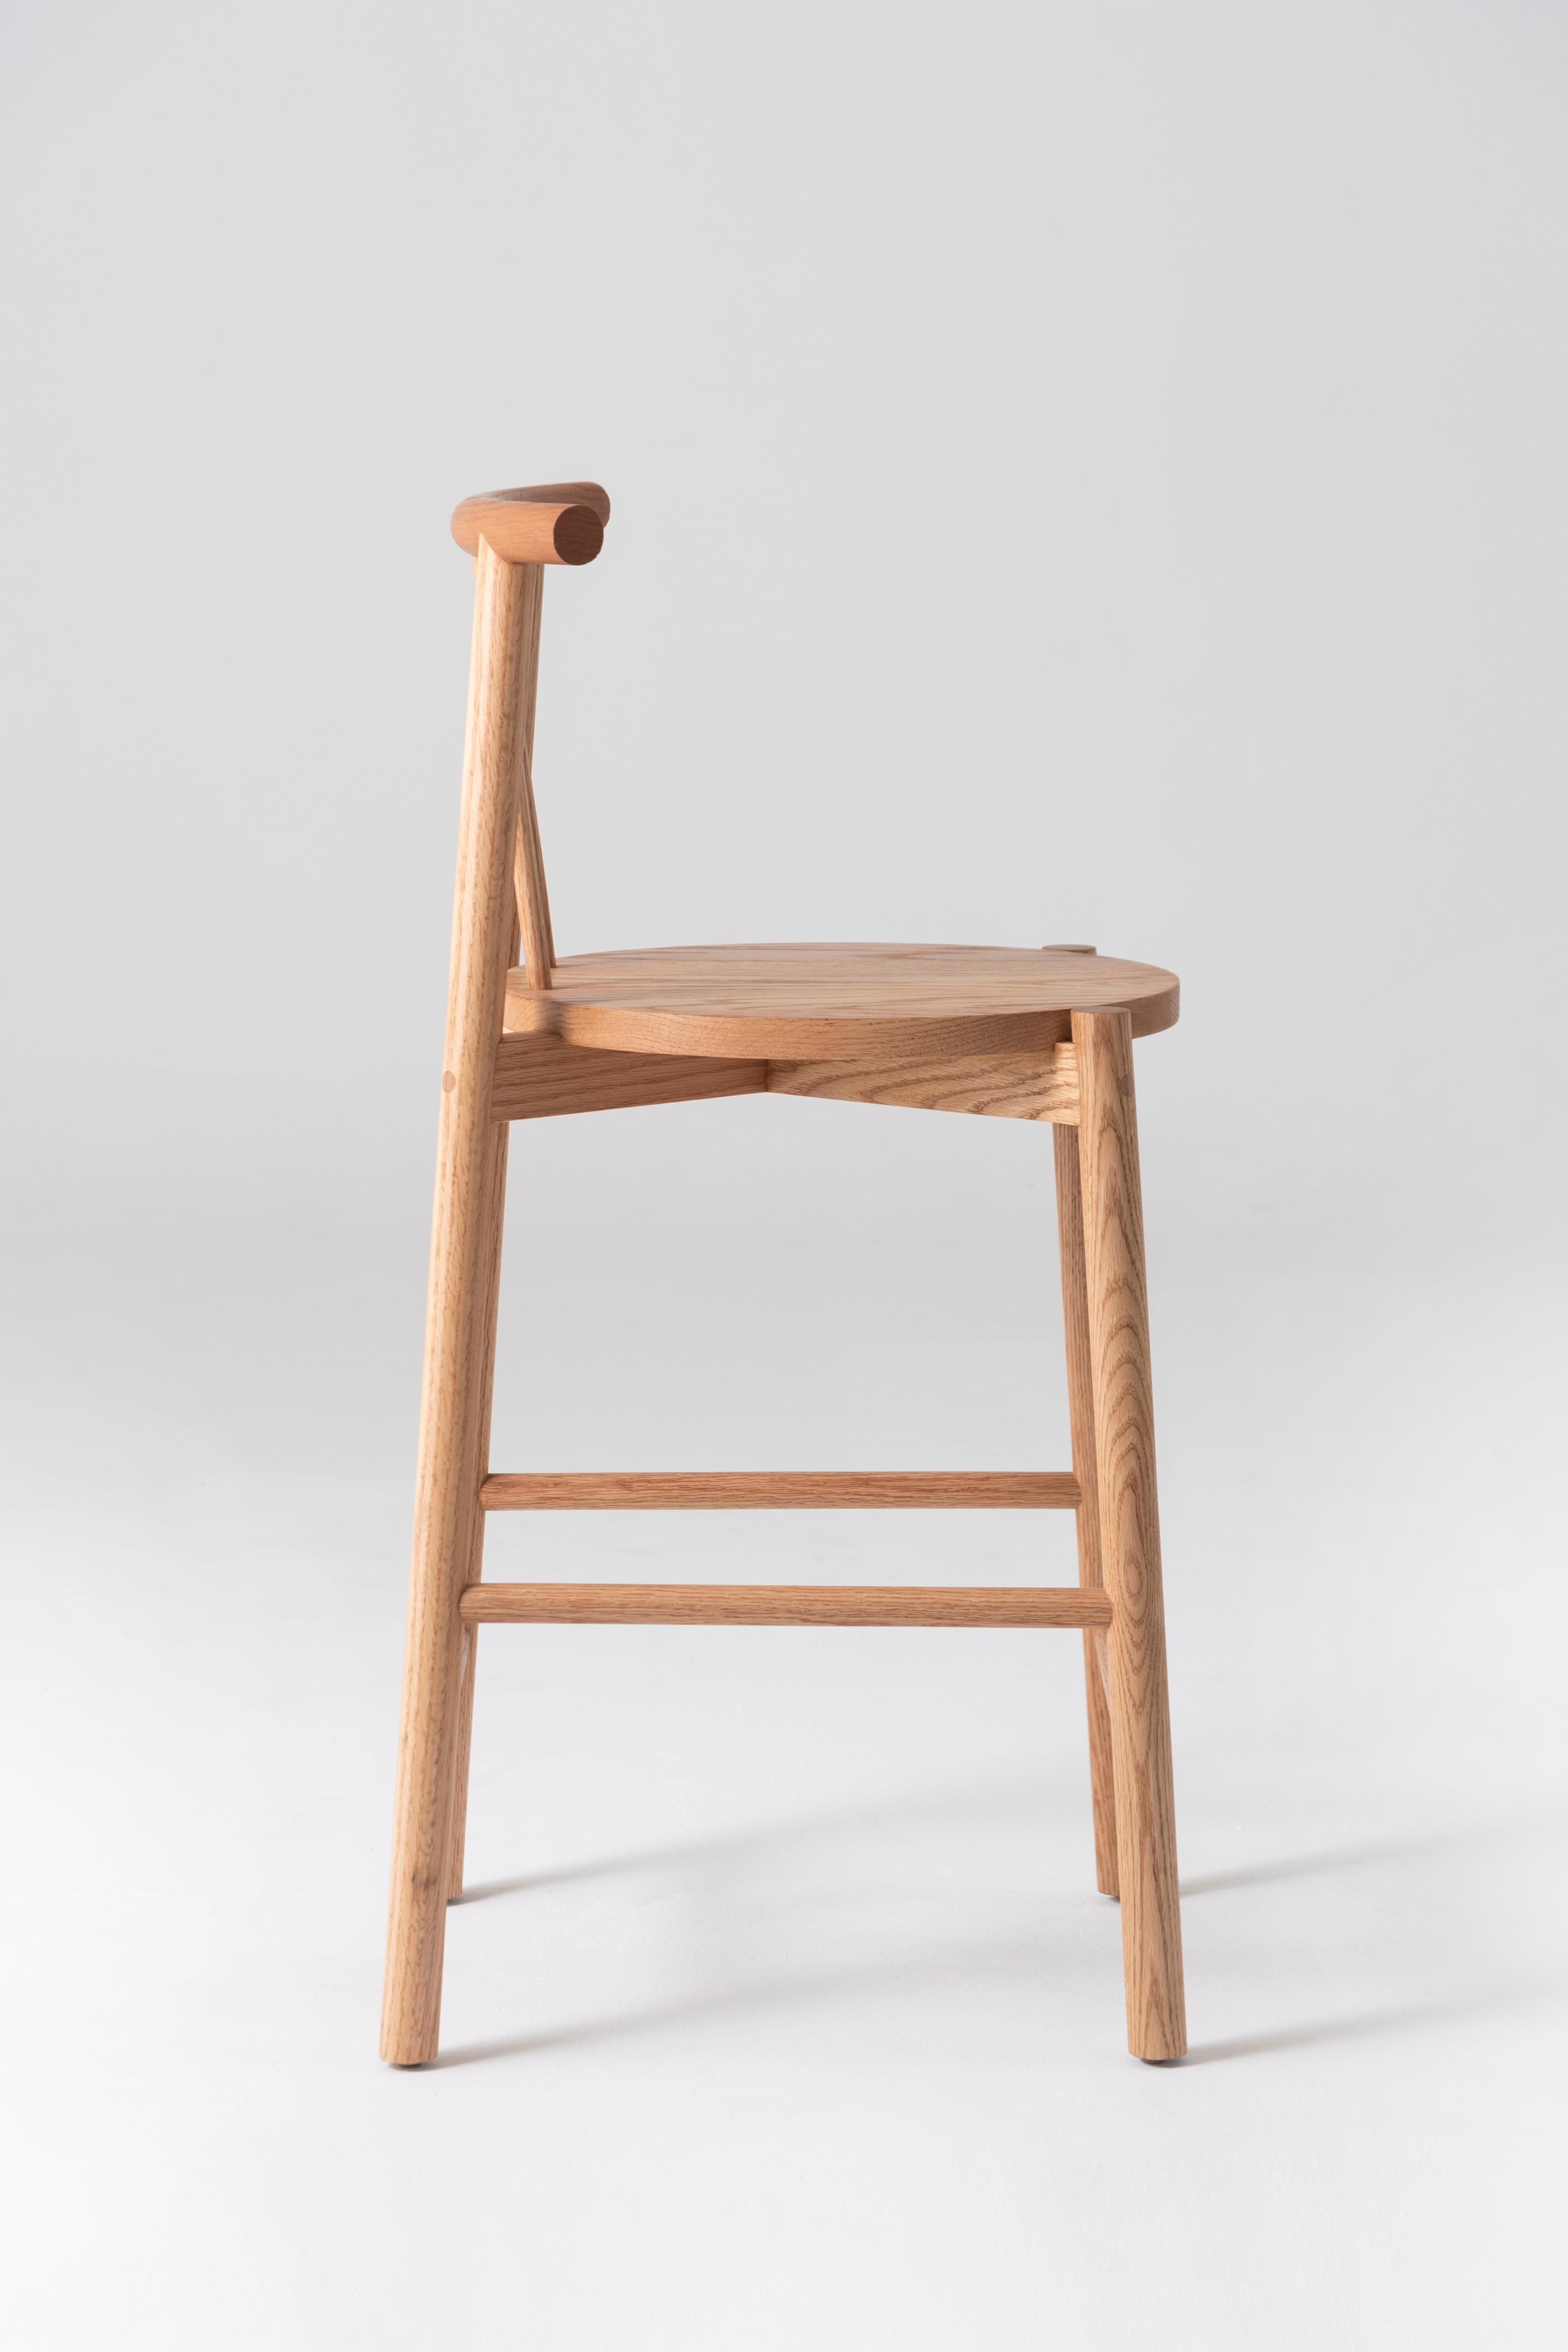 Minimalist Stool Crafted in Solid Oak Wood For Sale